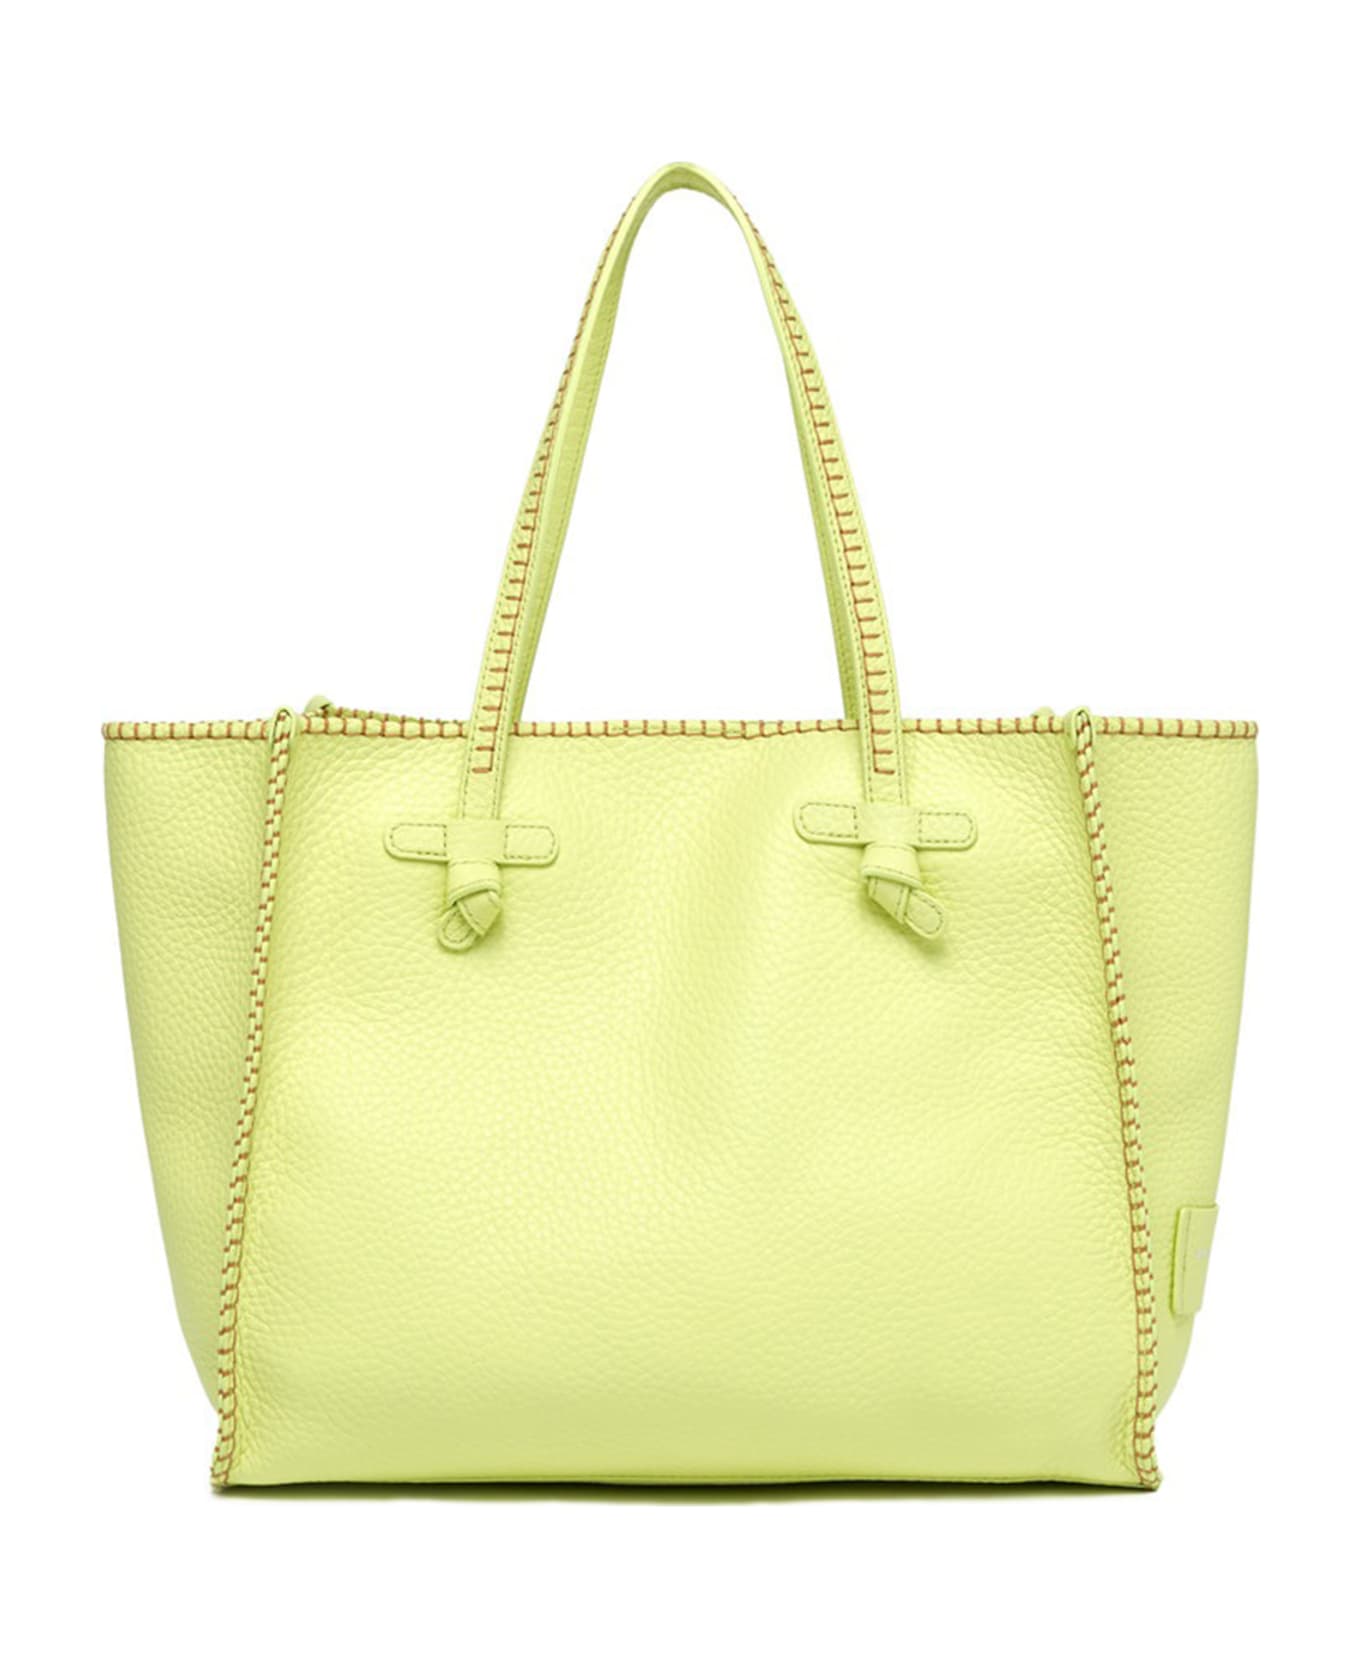 Gianni Chiarini Marcella Shopping Bag In Bubble Leather - SUNNY LIGHT トートバッグ